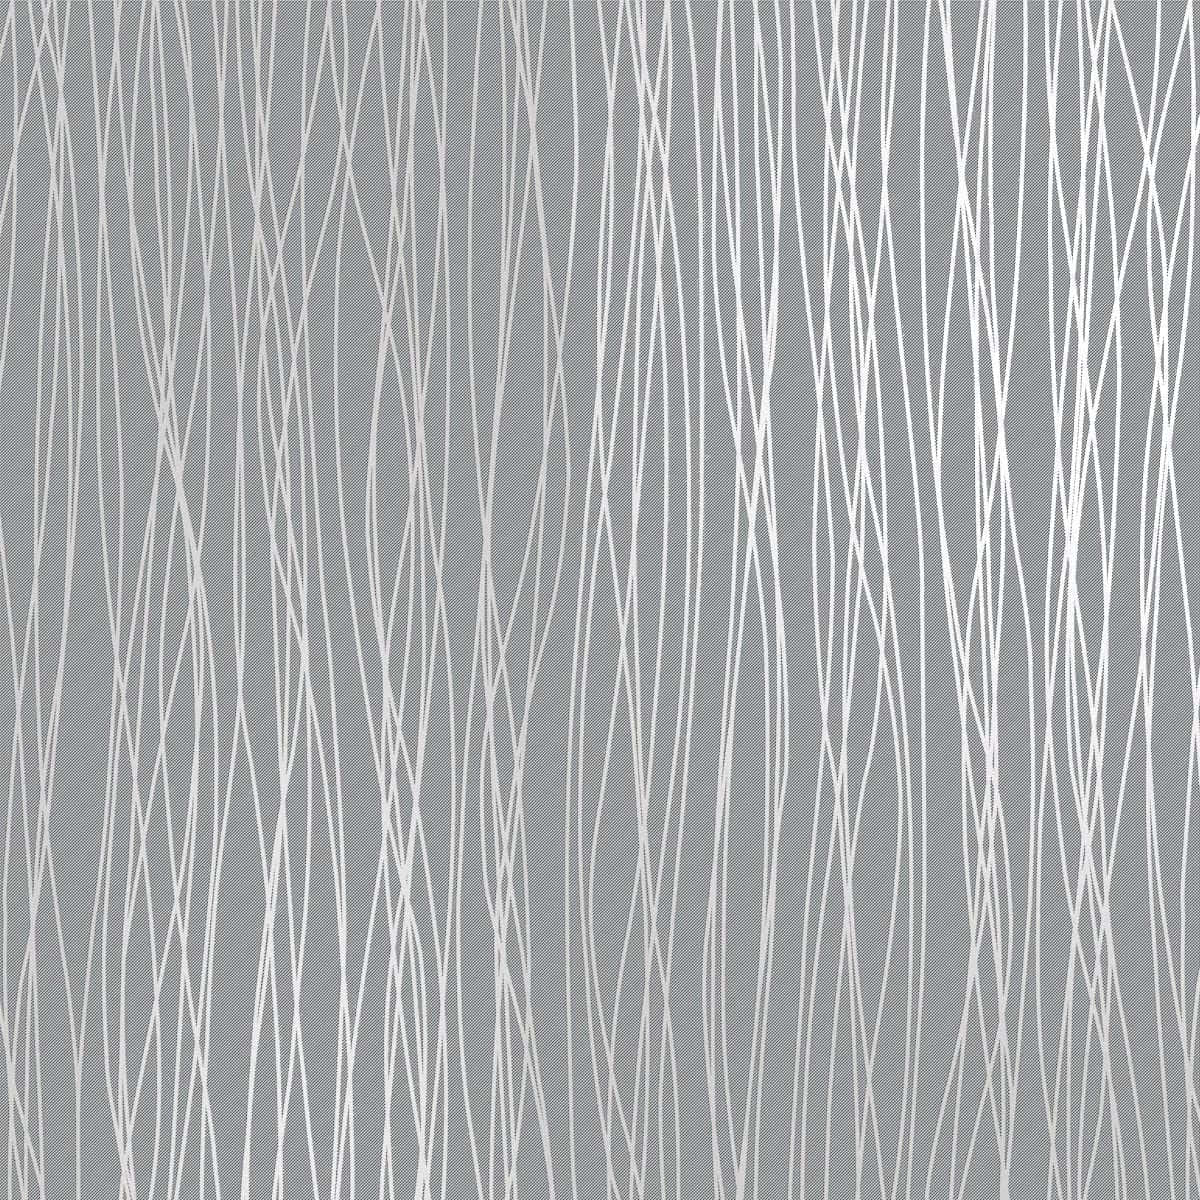 Abstract Gray White Wavy Lines Pattern Wallpaper